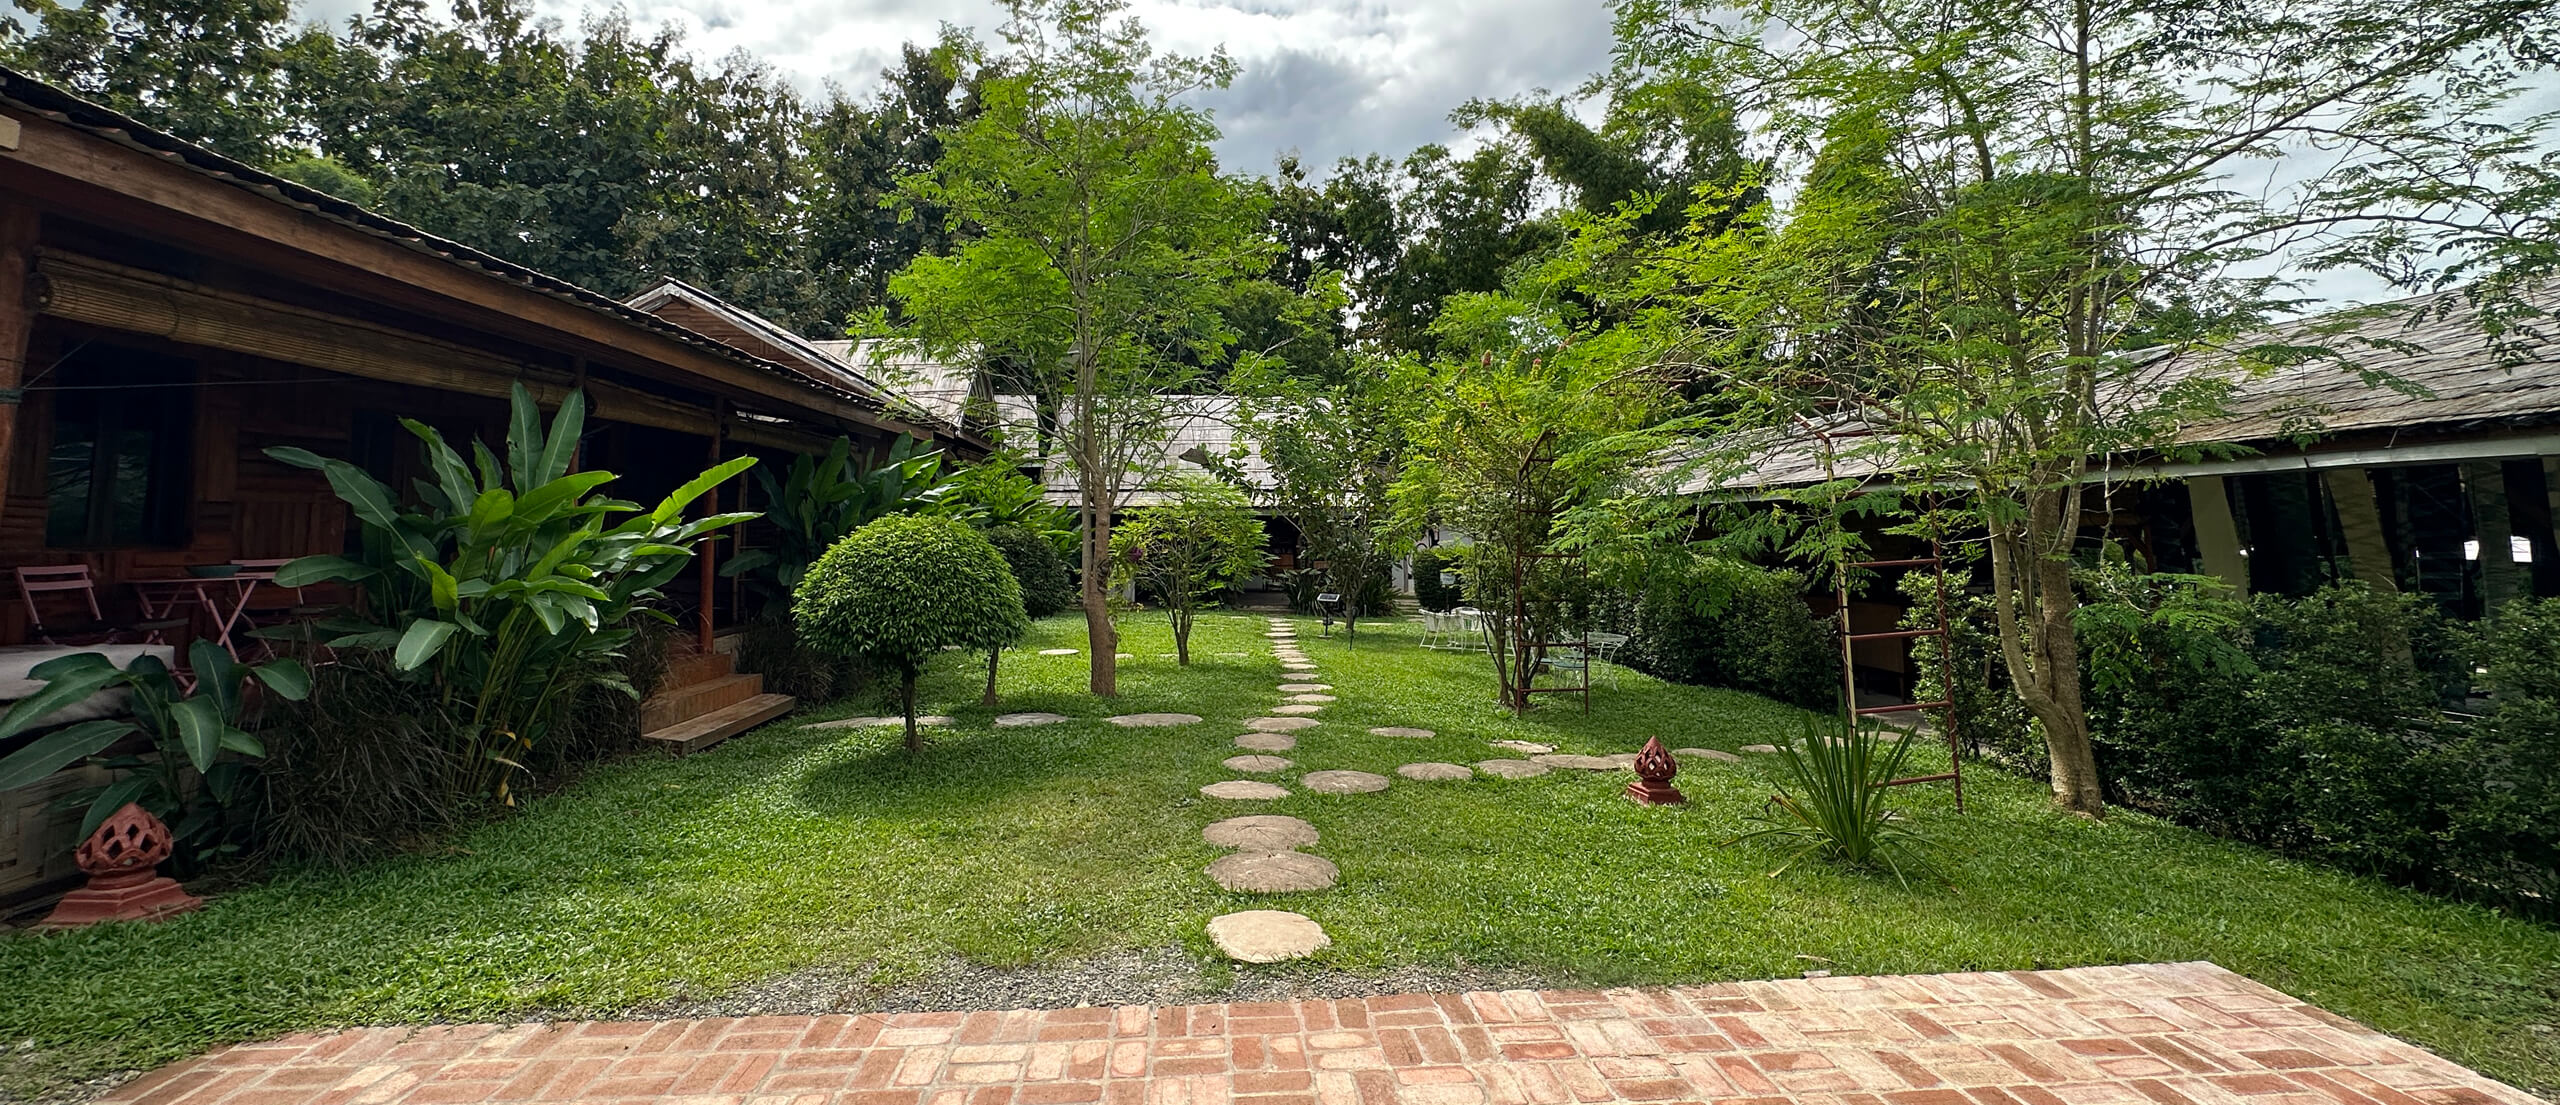 A Luang Prabang garden with a pathway leading to a house.